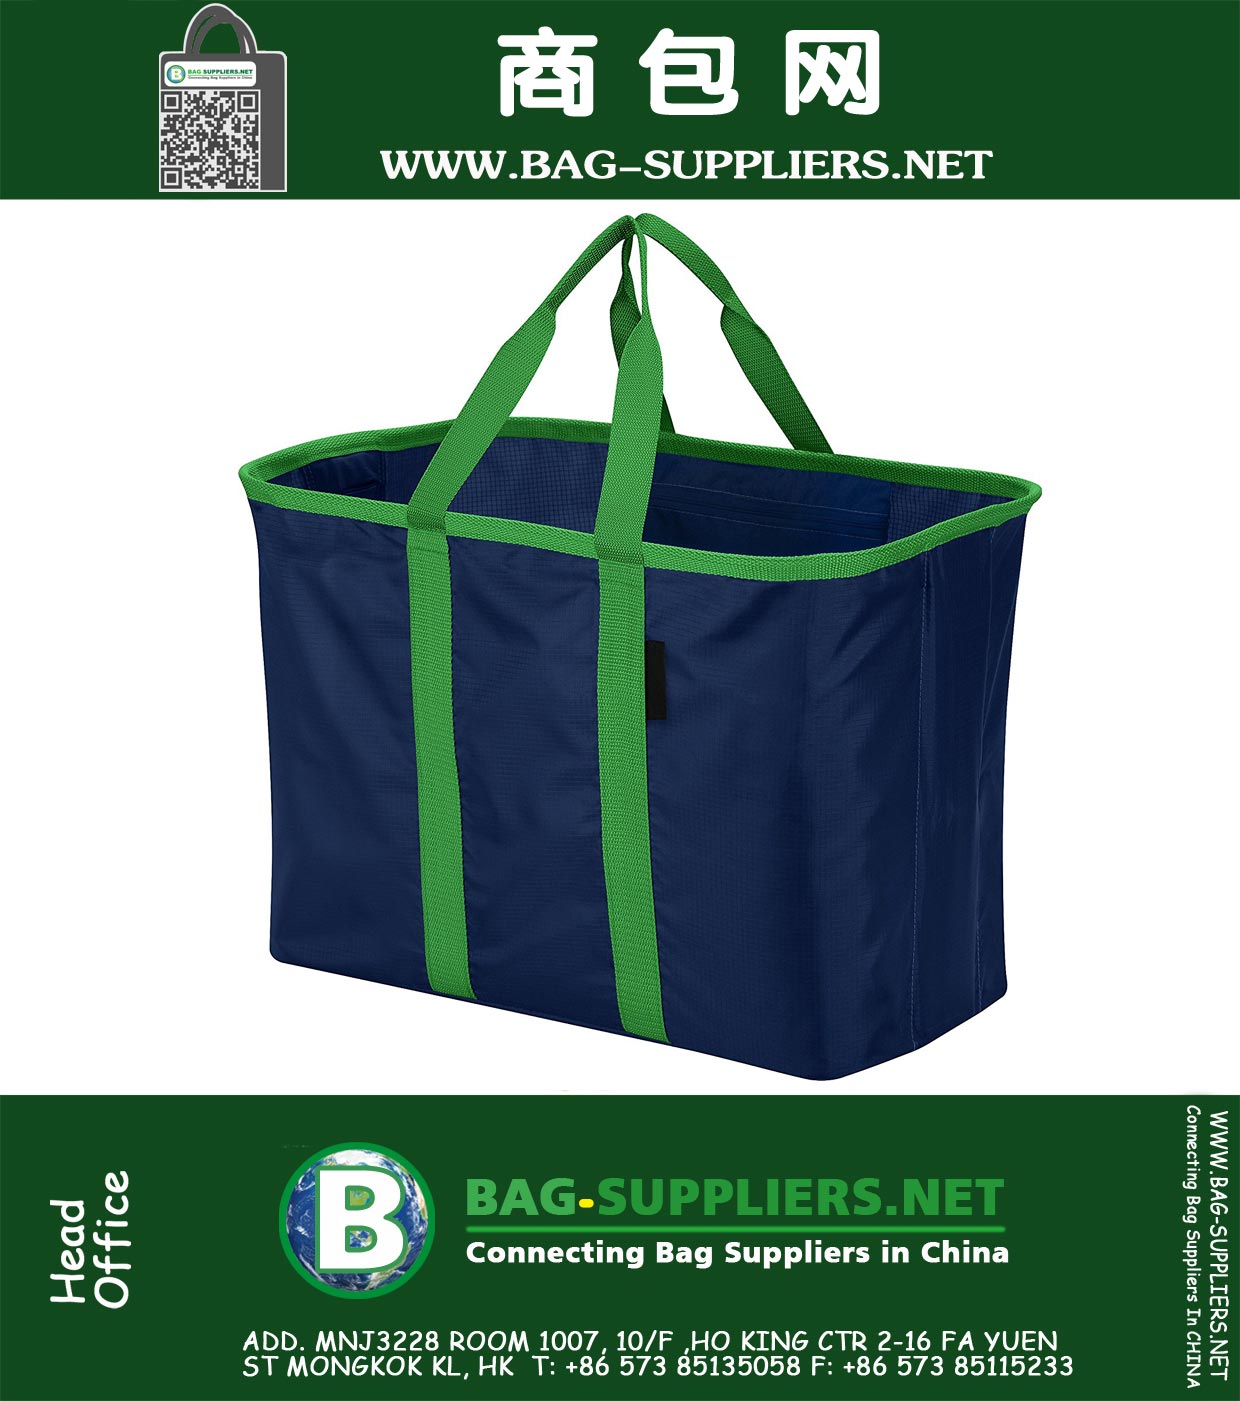 40 Liter Reusable Tote Bag with Reinforced Bottom Collapsible Grocery Shopping Basket